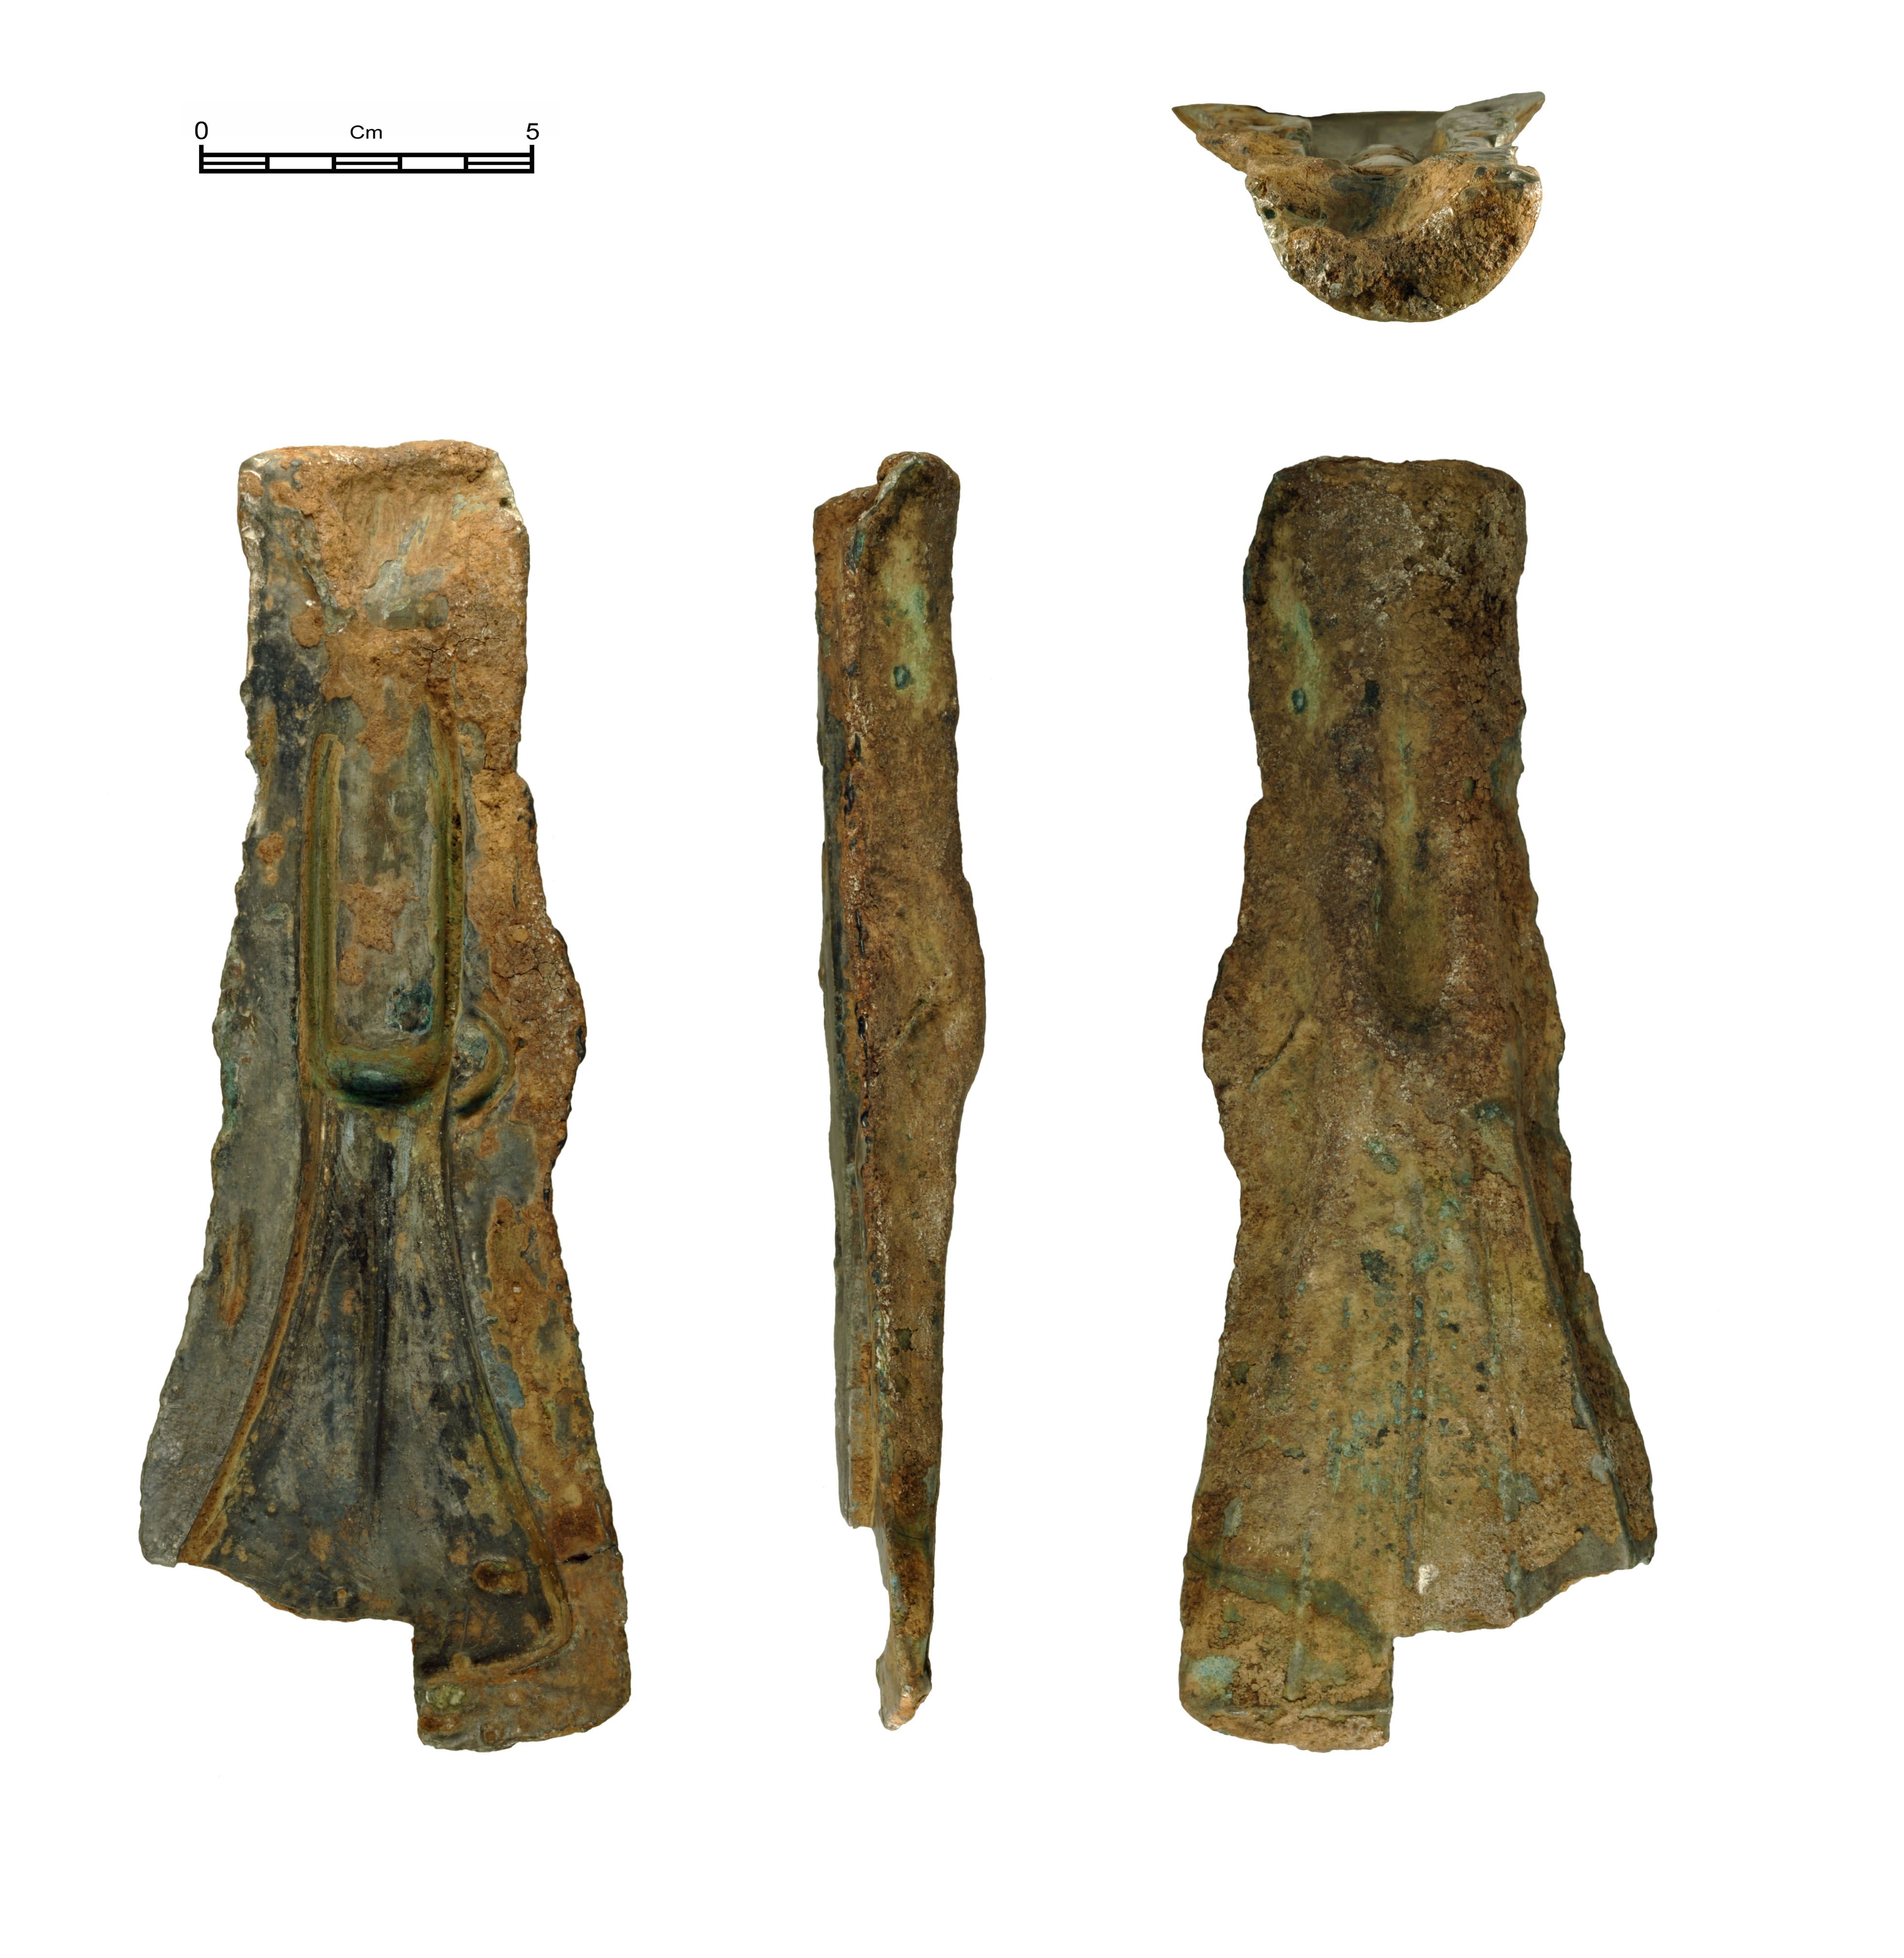 Bronze Age axe mould